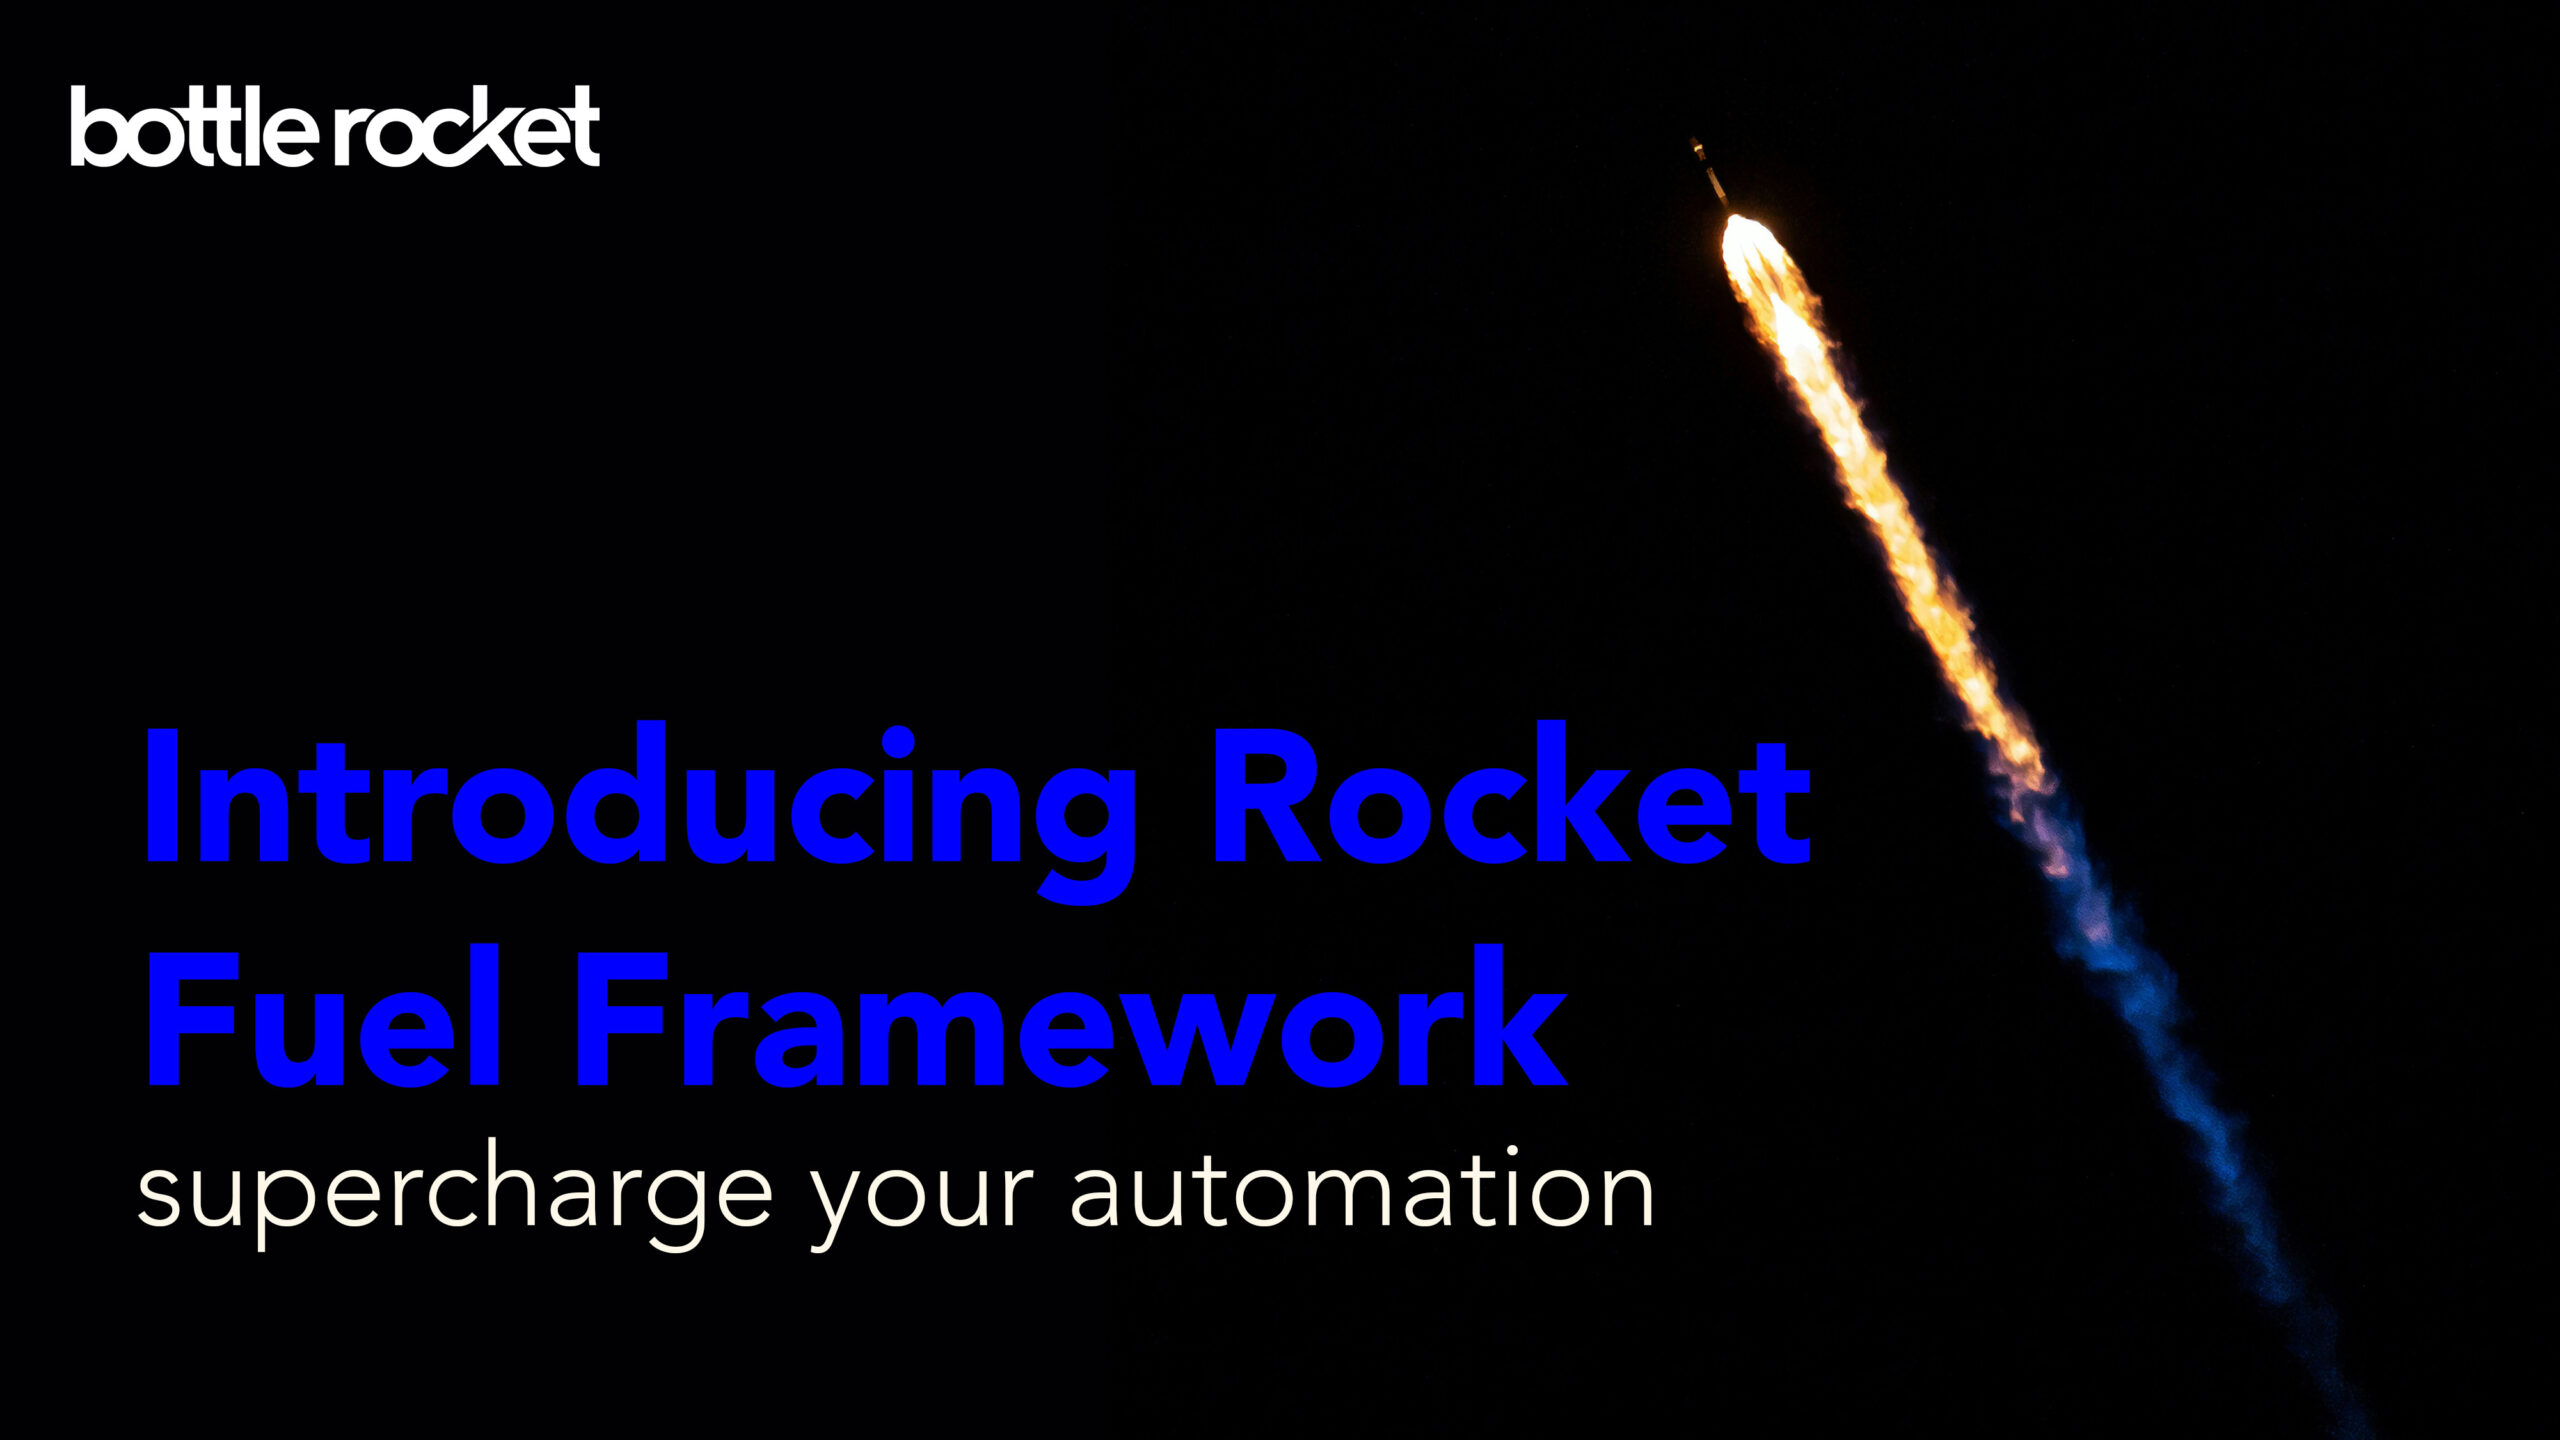 Image of a rocket with "Introducing Rocket Fuel Frameworksupercharge your automation"